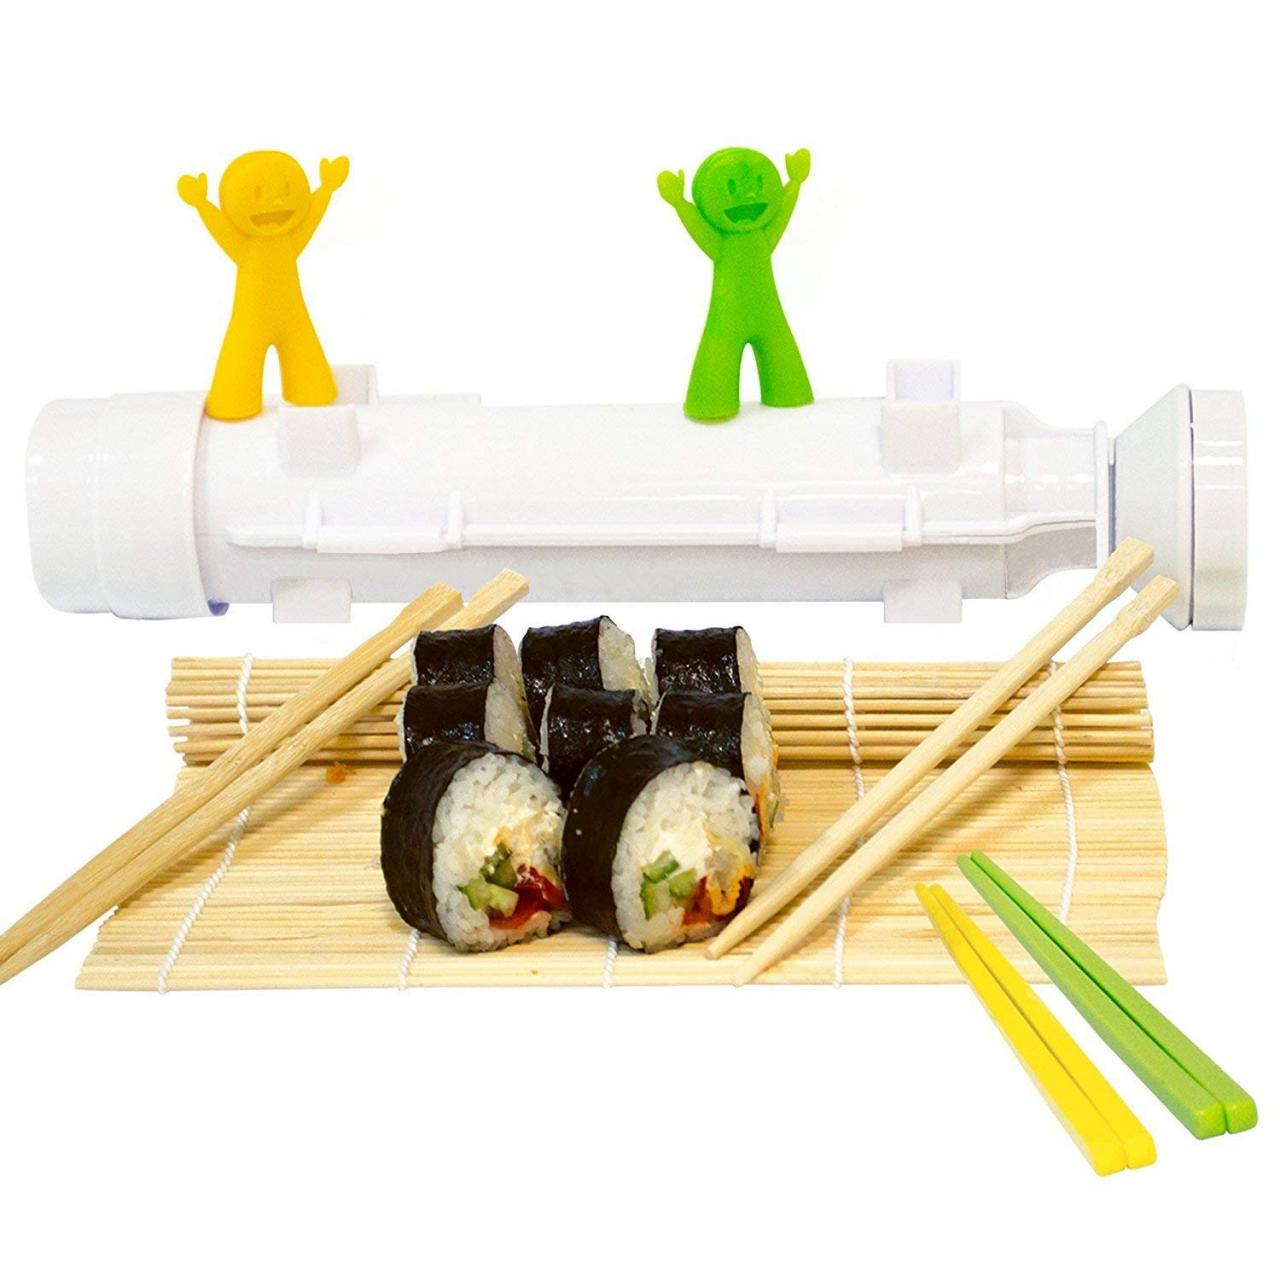 https://food.fnr.sndimg.com/content/dam/images/food/products/2018/12/11/rx_sushi-mat-and-bamboo-chopsticks-with-silicone-helper-set.jpeg.rend.hgtvcom.1280.1280.suffix/1544561698865.jpeg